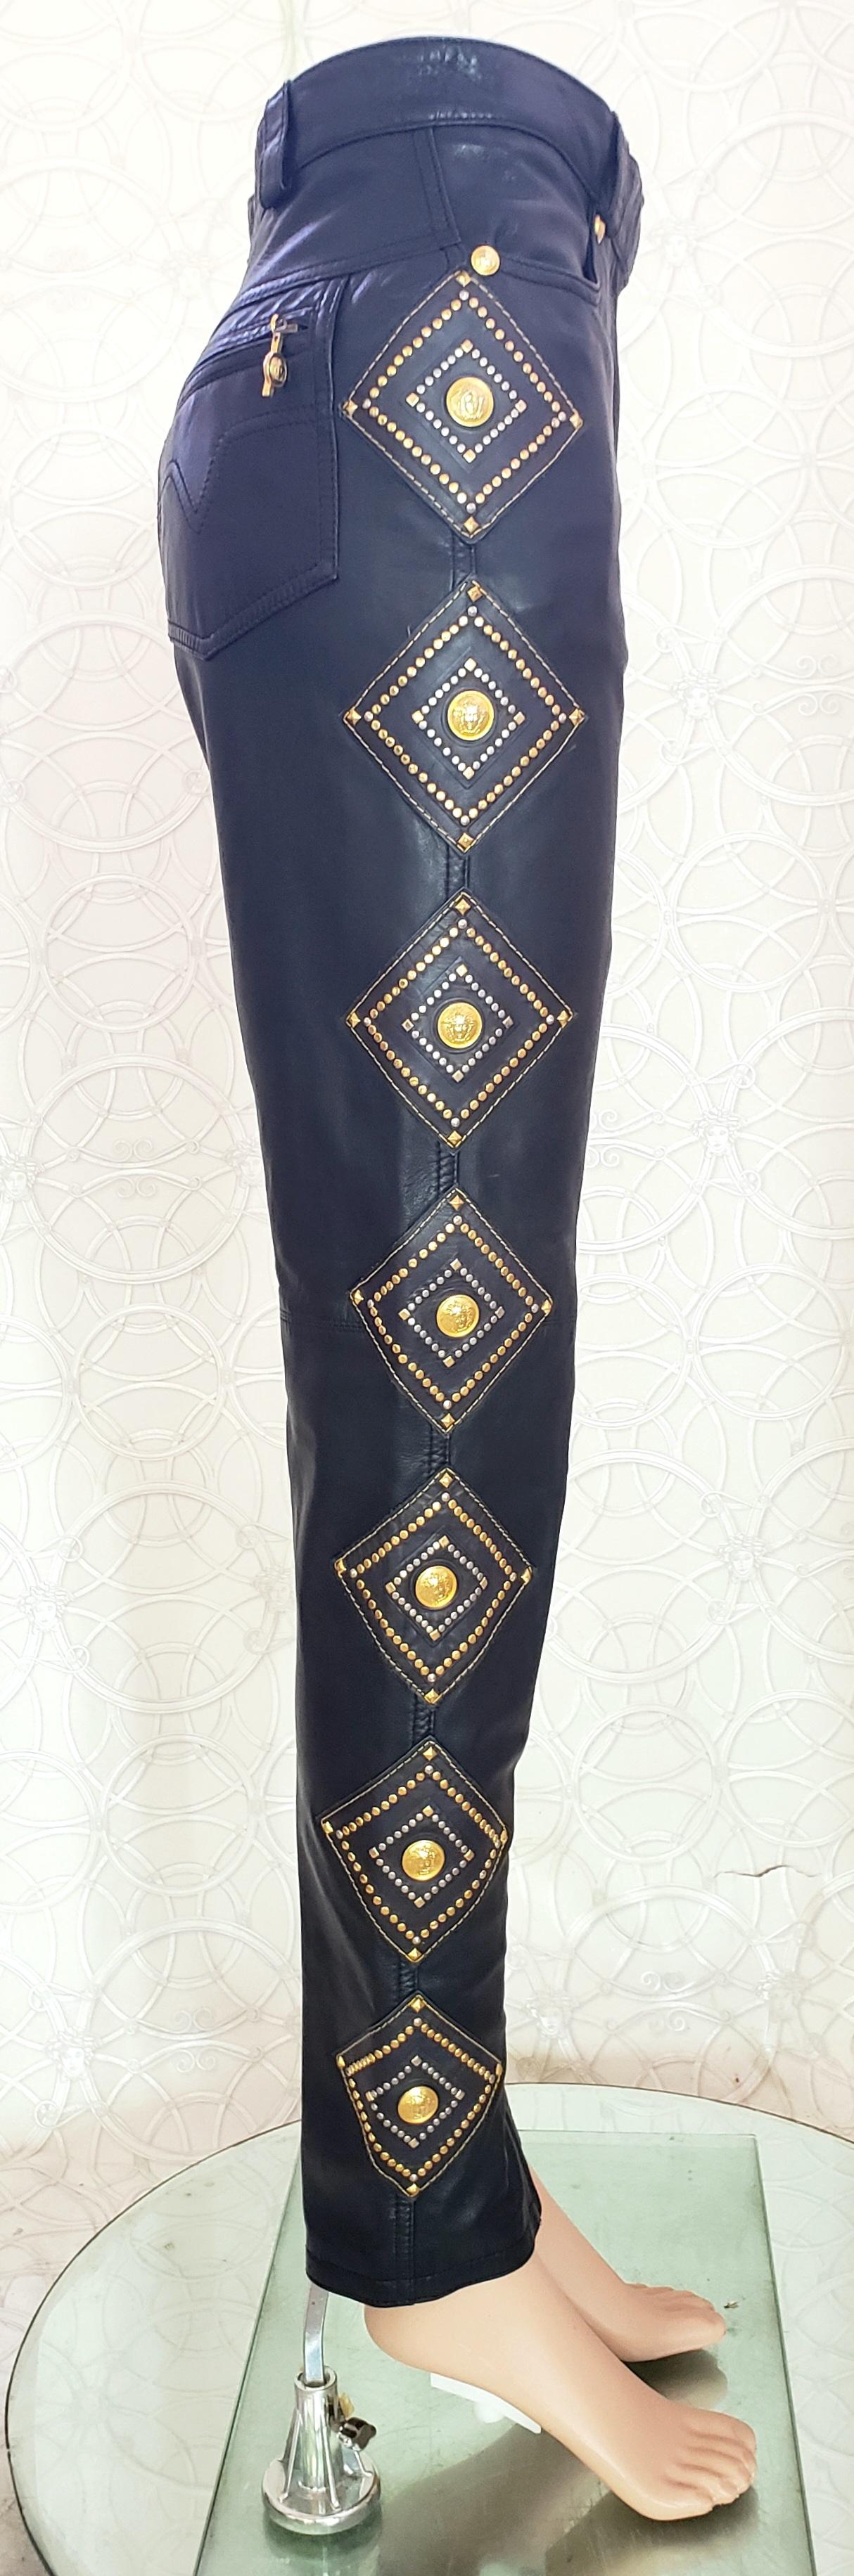 1991 GIANNI VERSACE PRIVATE MUSEUM WORTHY COLLECTION BLACK LEATHER STUDDED Pants For Sale 4